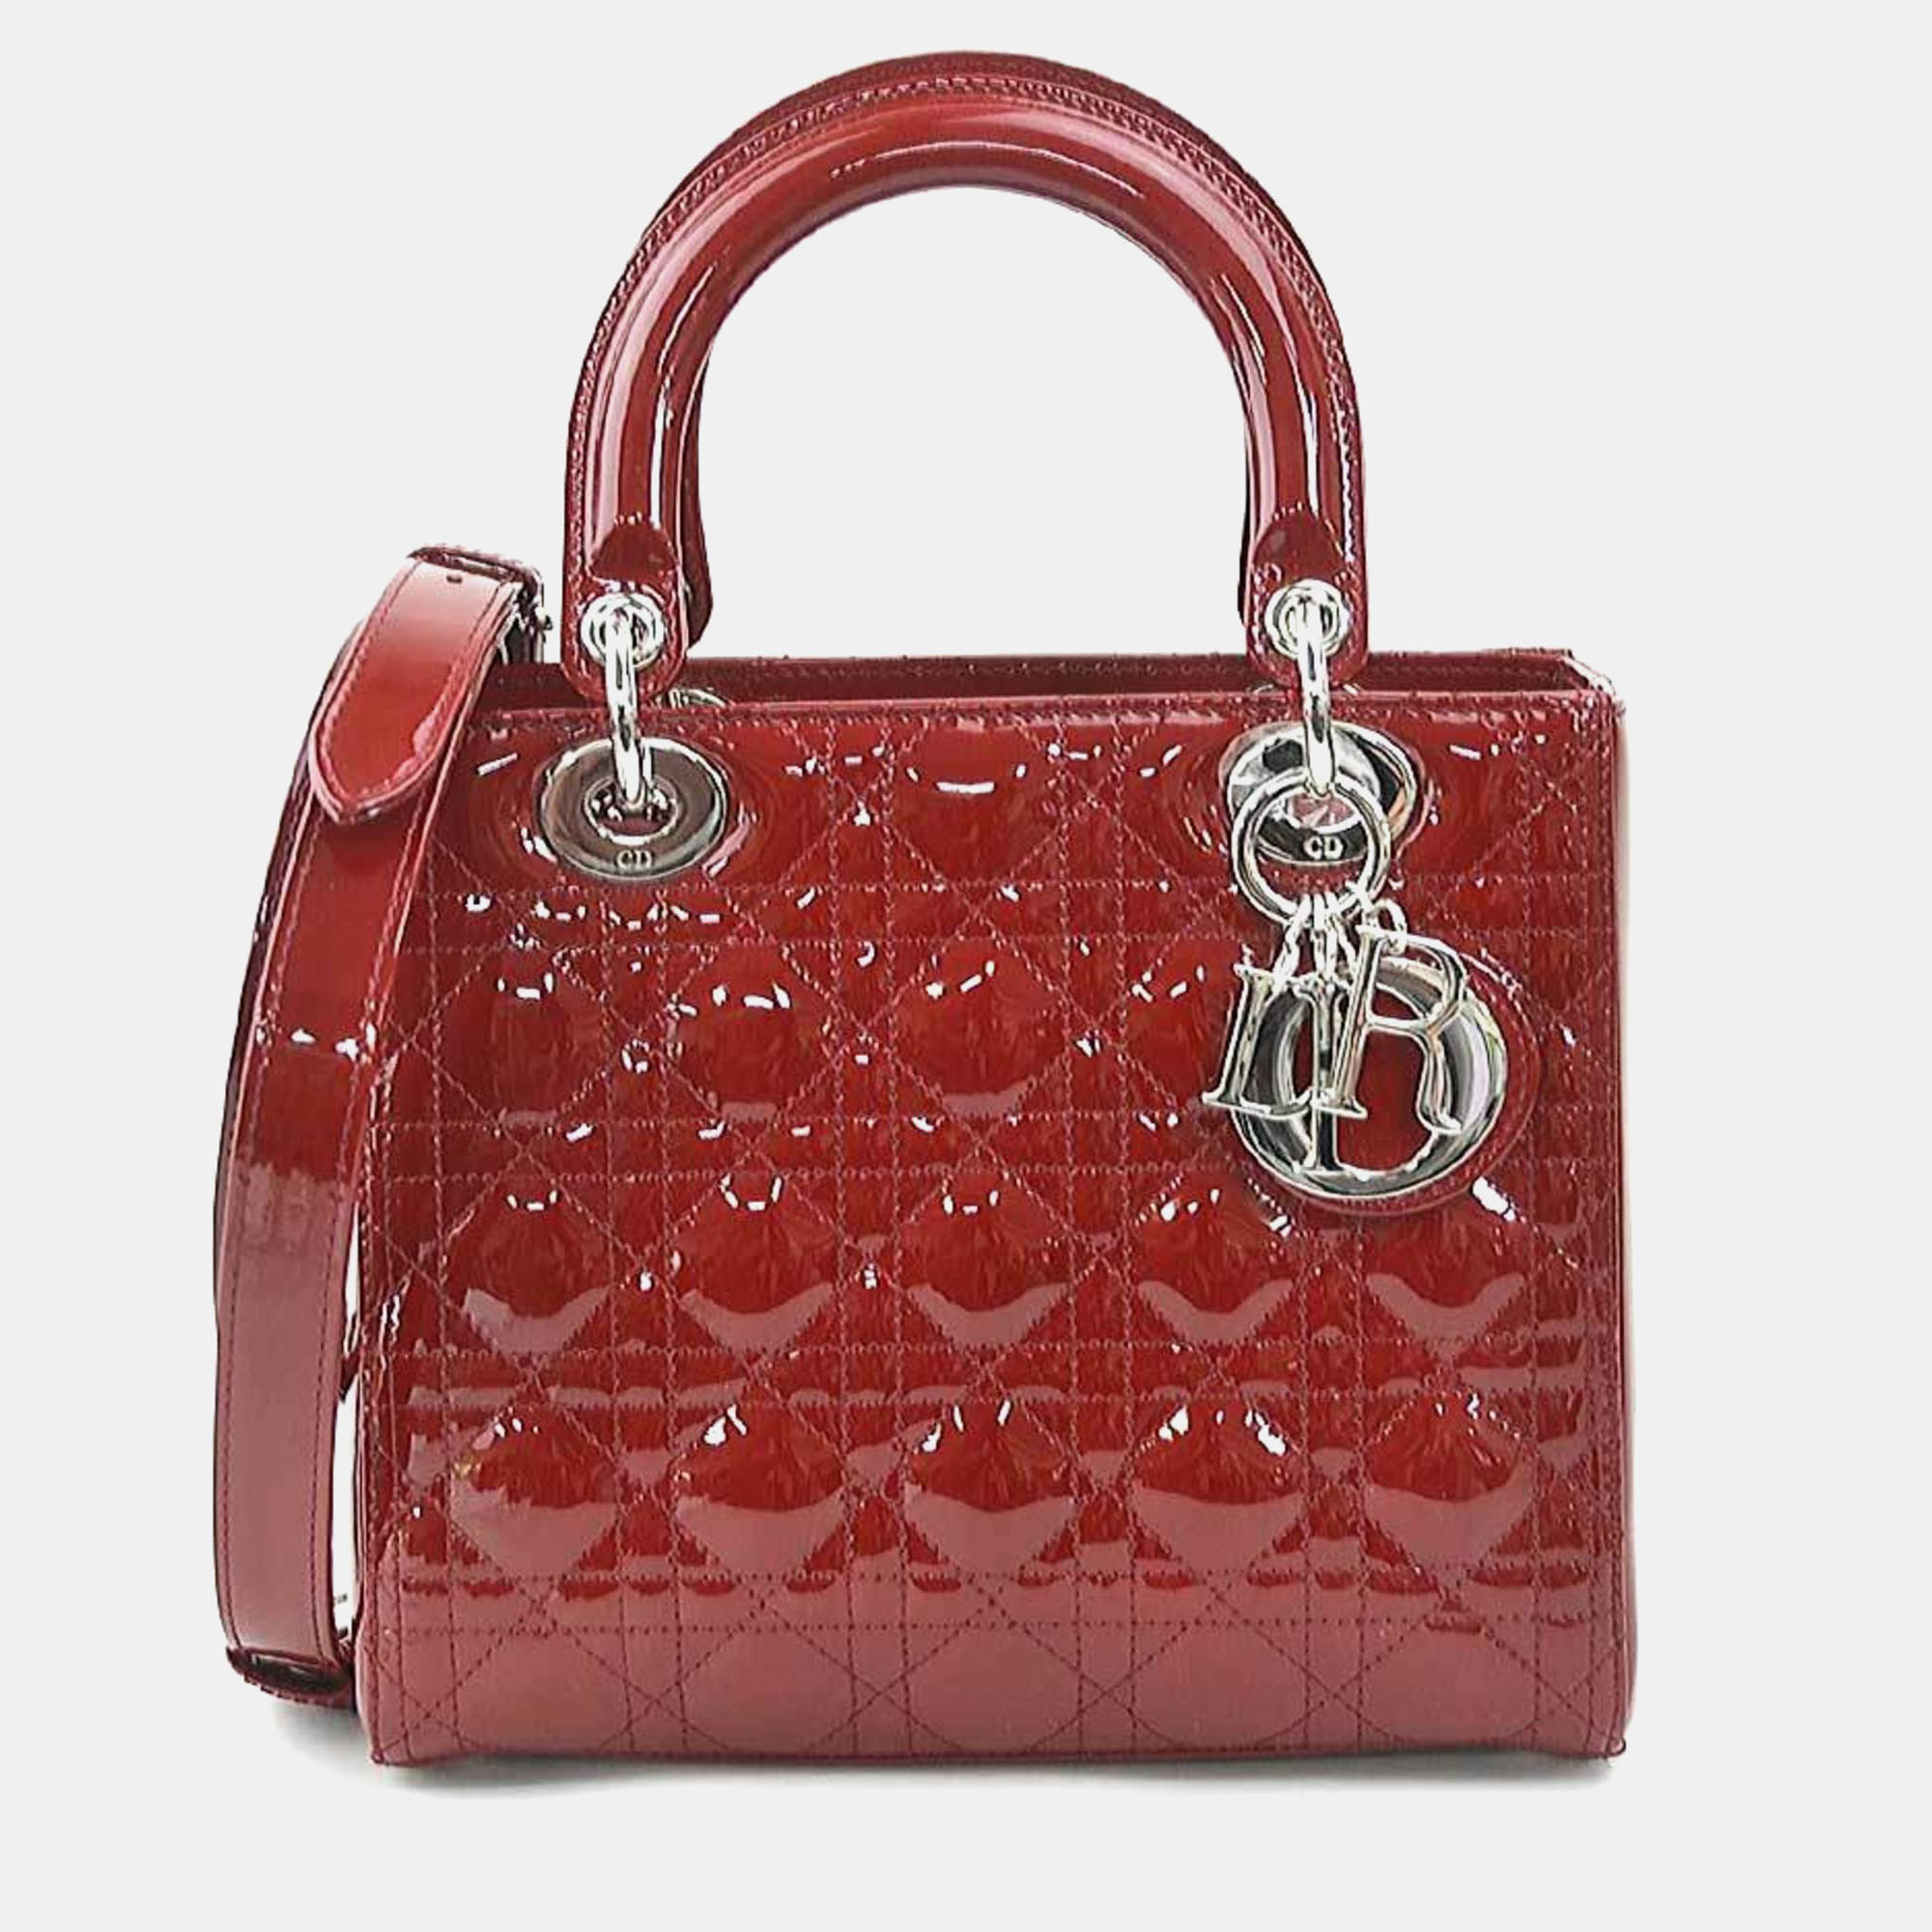 Dior red glazed patent leather medium lady dior tote